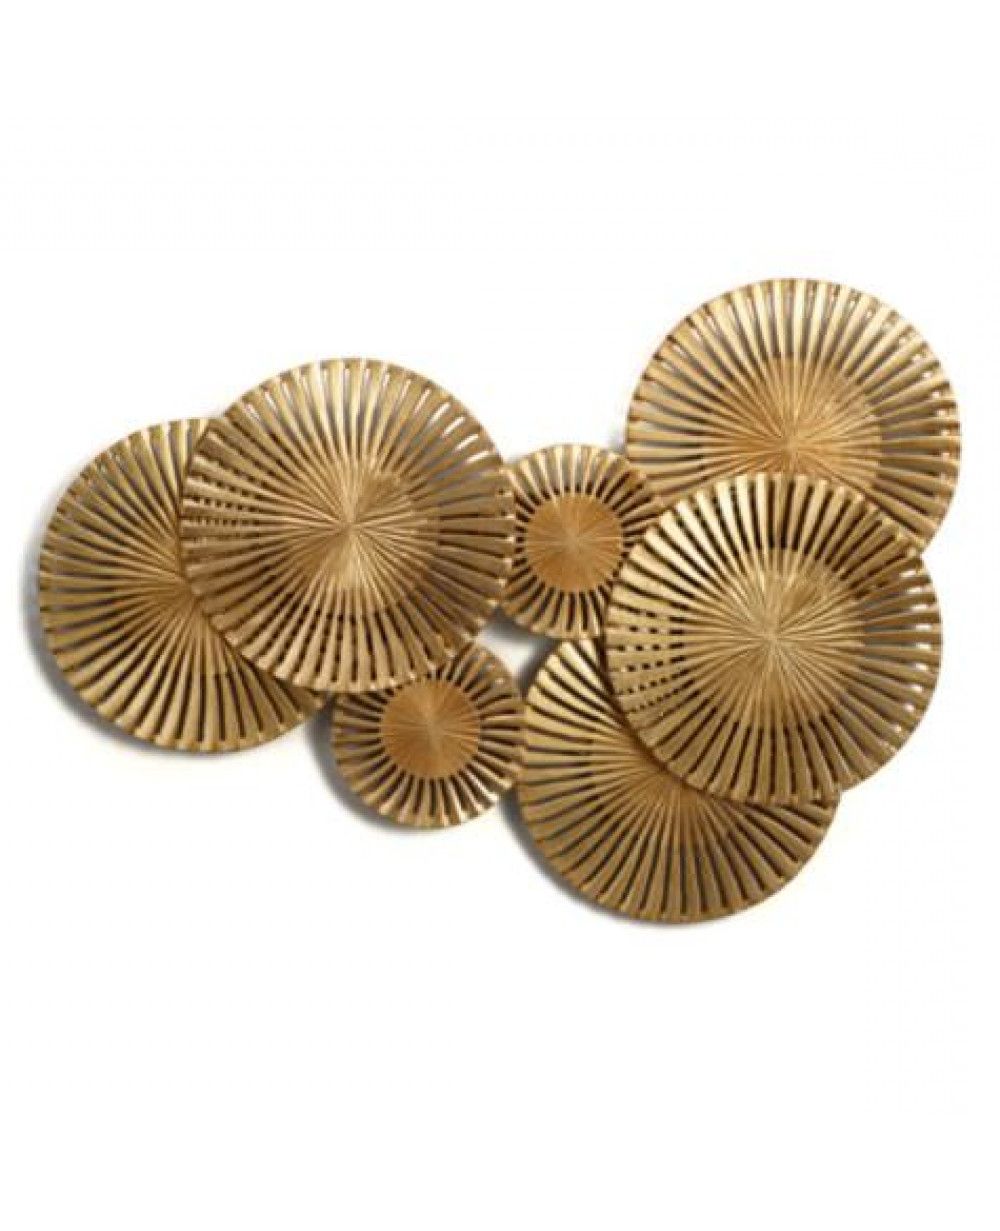 Widely Used Handcrafted Metal Wall Décor With Handcrafted Old Brass Copper 6 Pcs Sunburst Golden Color (Photo 2 of 20)